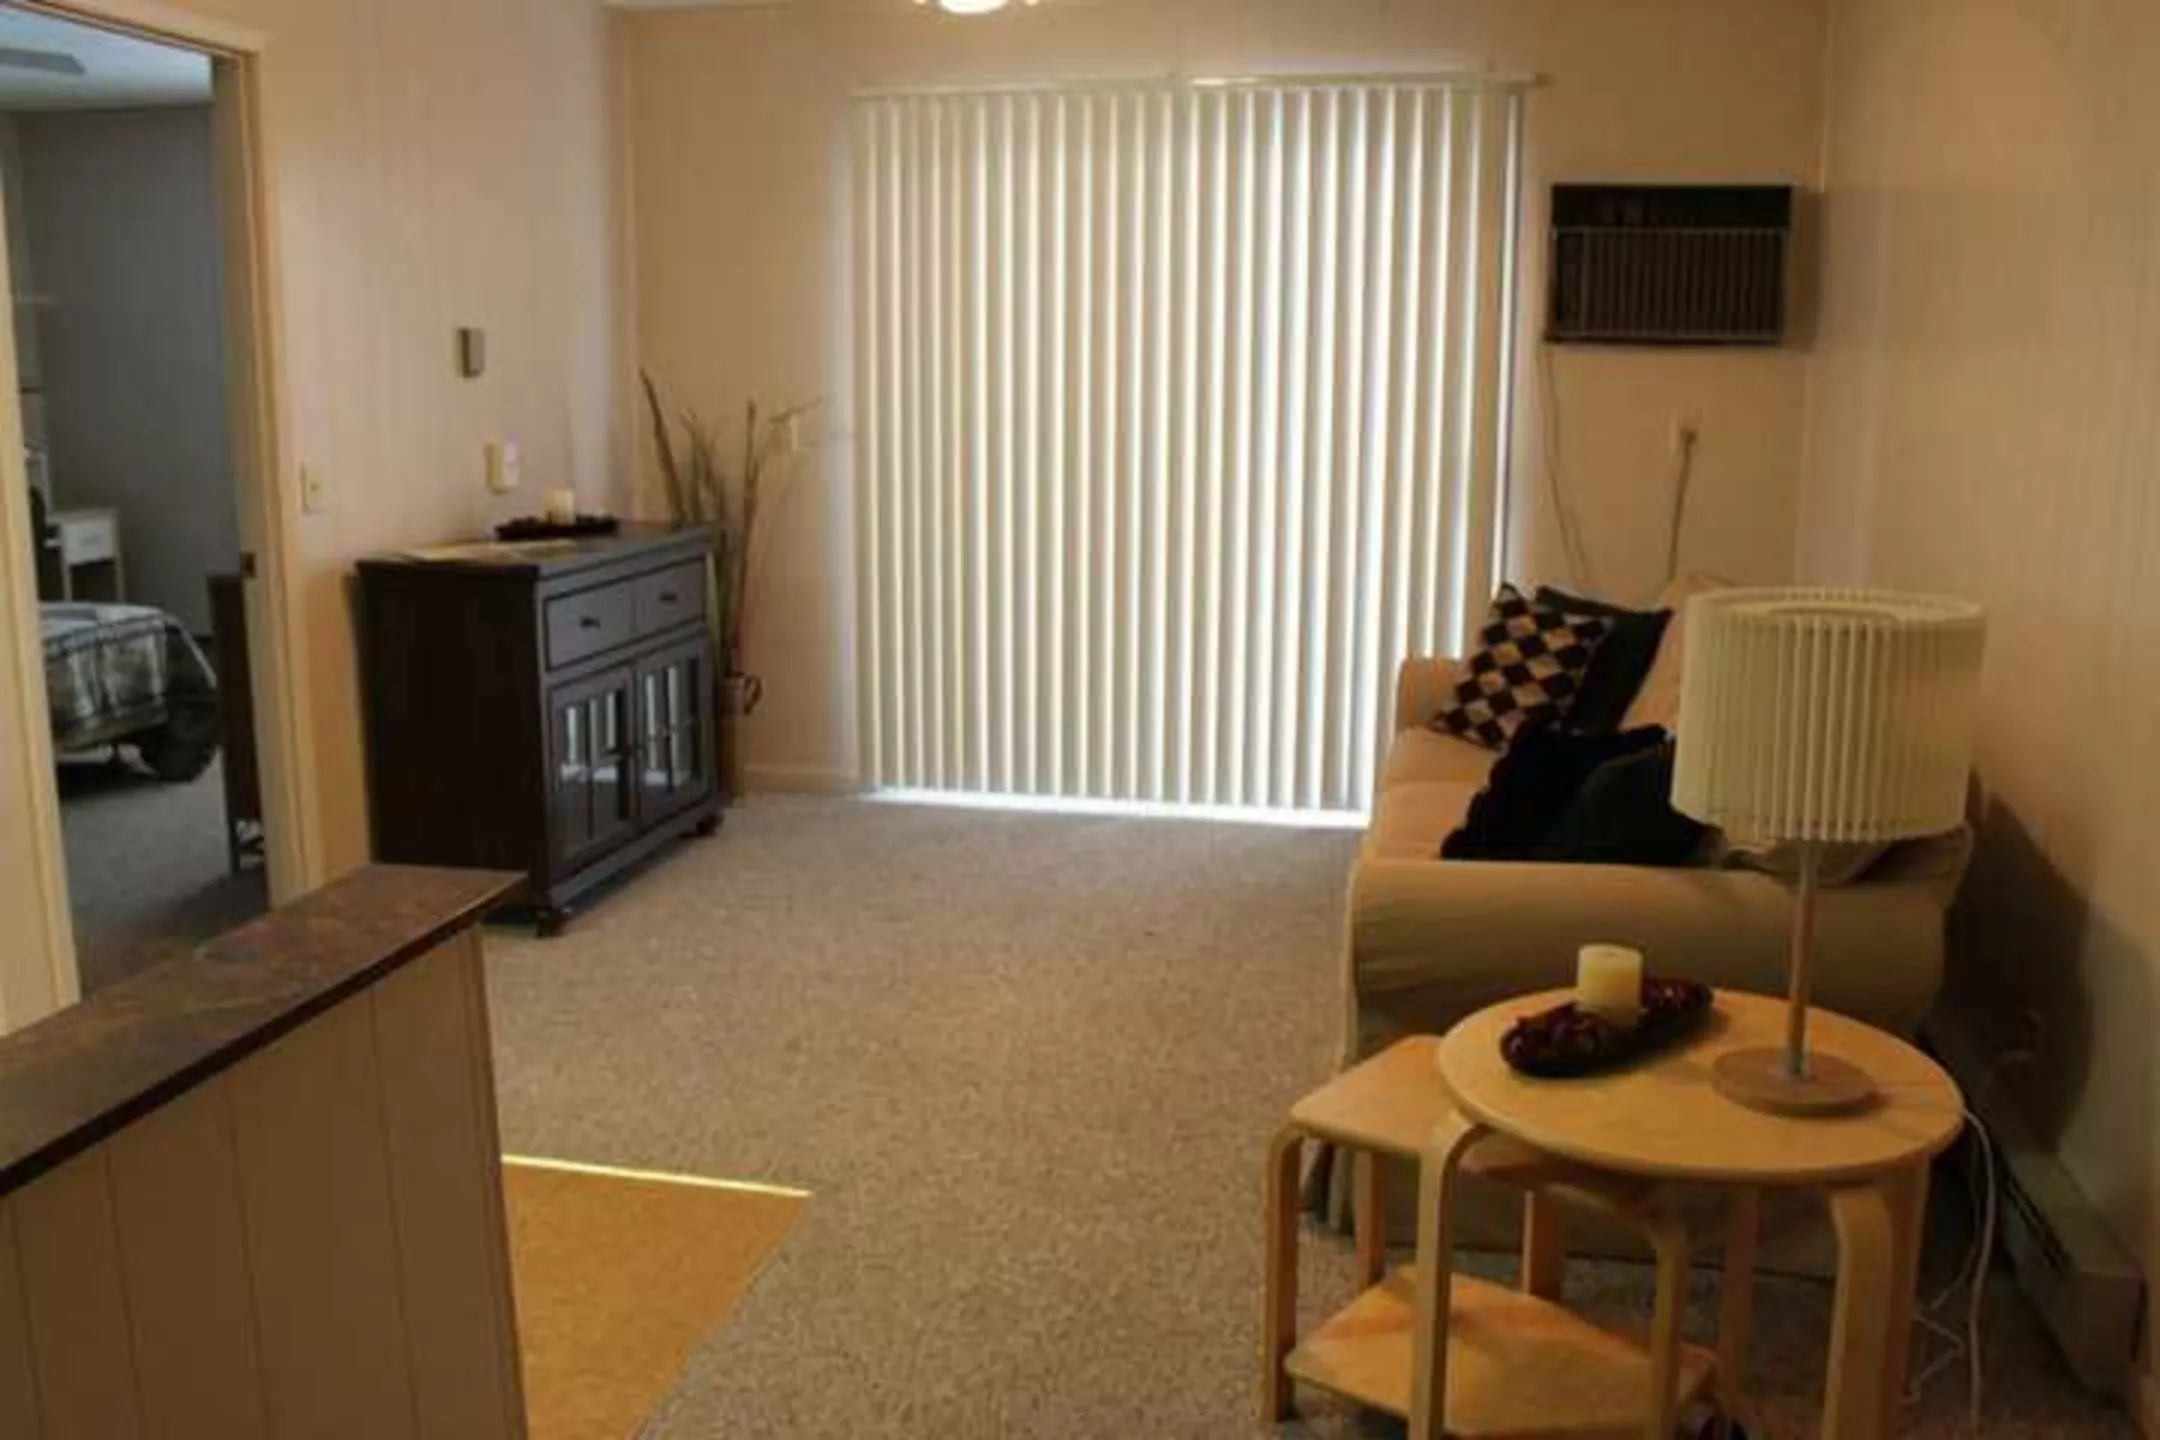 Living Room - Crestview Apartments - West Lafayette, IN